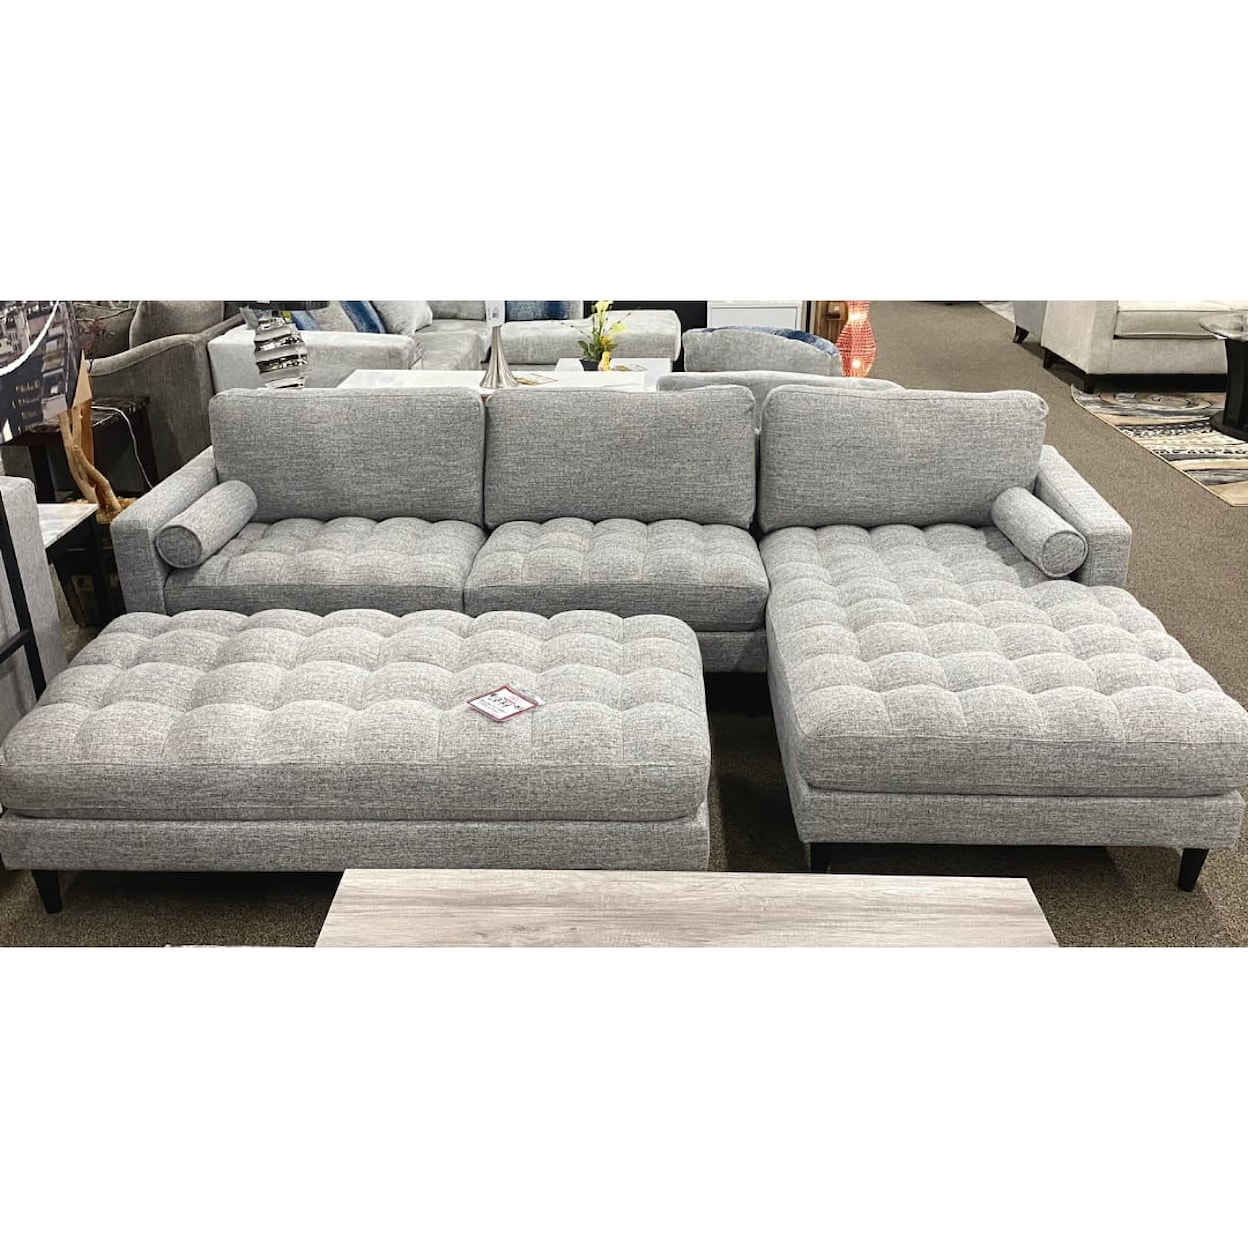 Lifestyle Beverly BEVERLY STEEL 2 PIECE SECTIONAL |